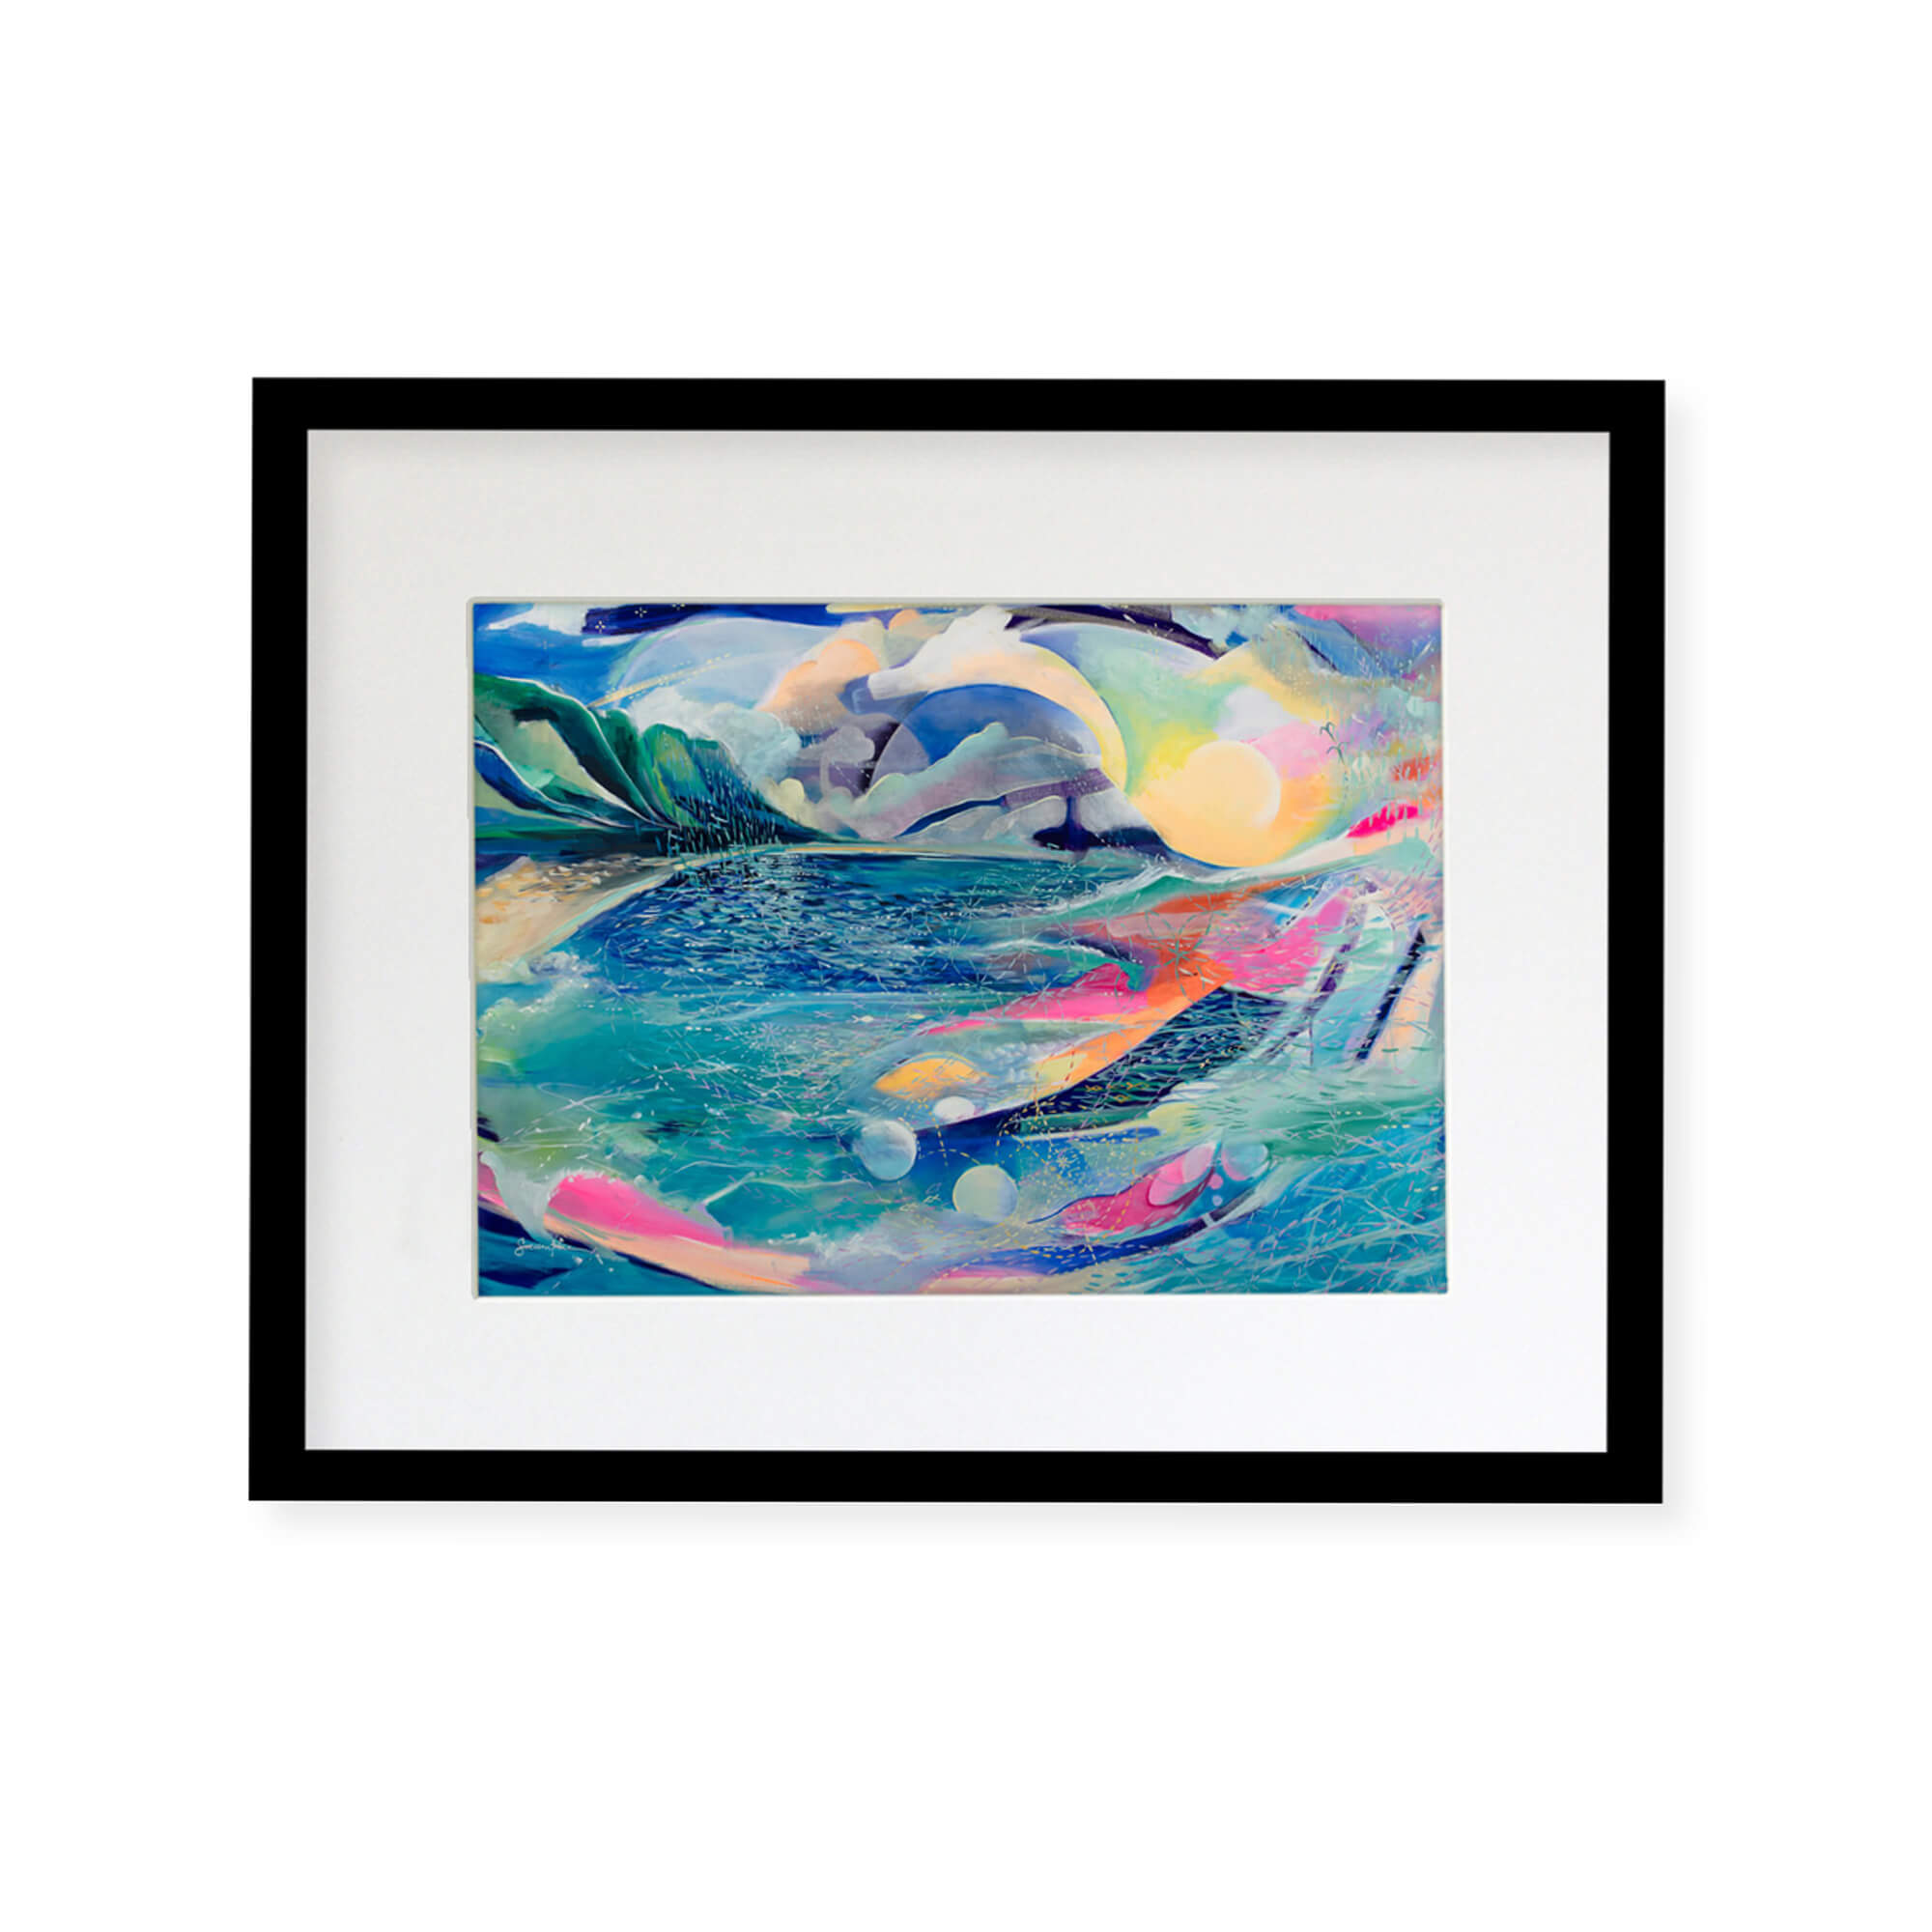 Framed matted art print of an abstract artwork of a seascape with vibrant pastel colors Hawaii artist Saumolia Puapuaga